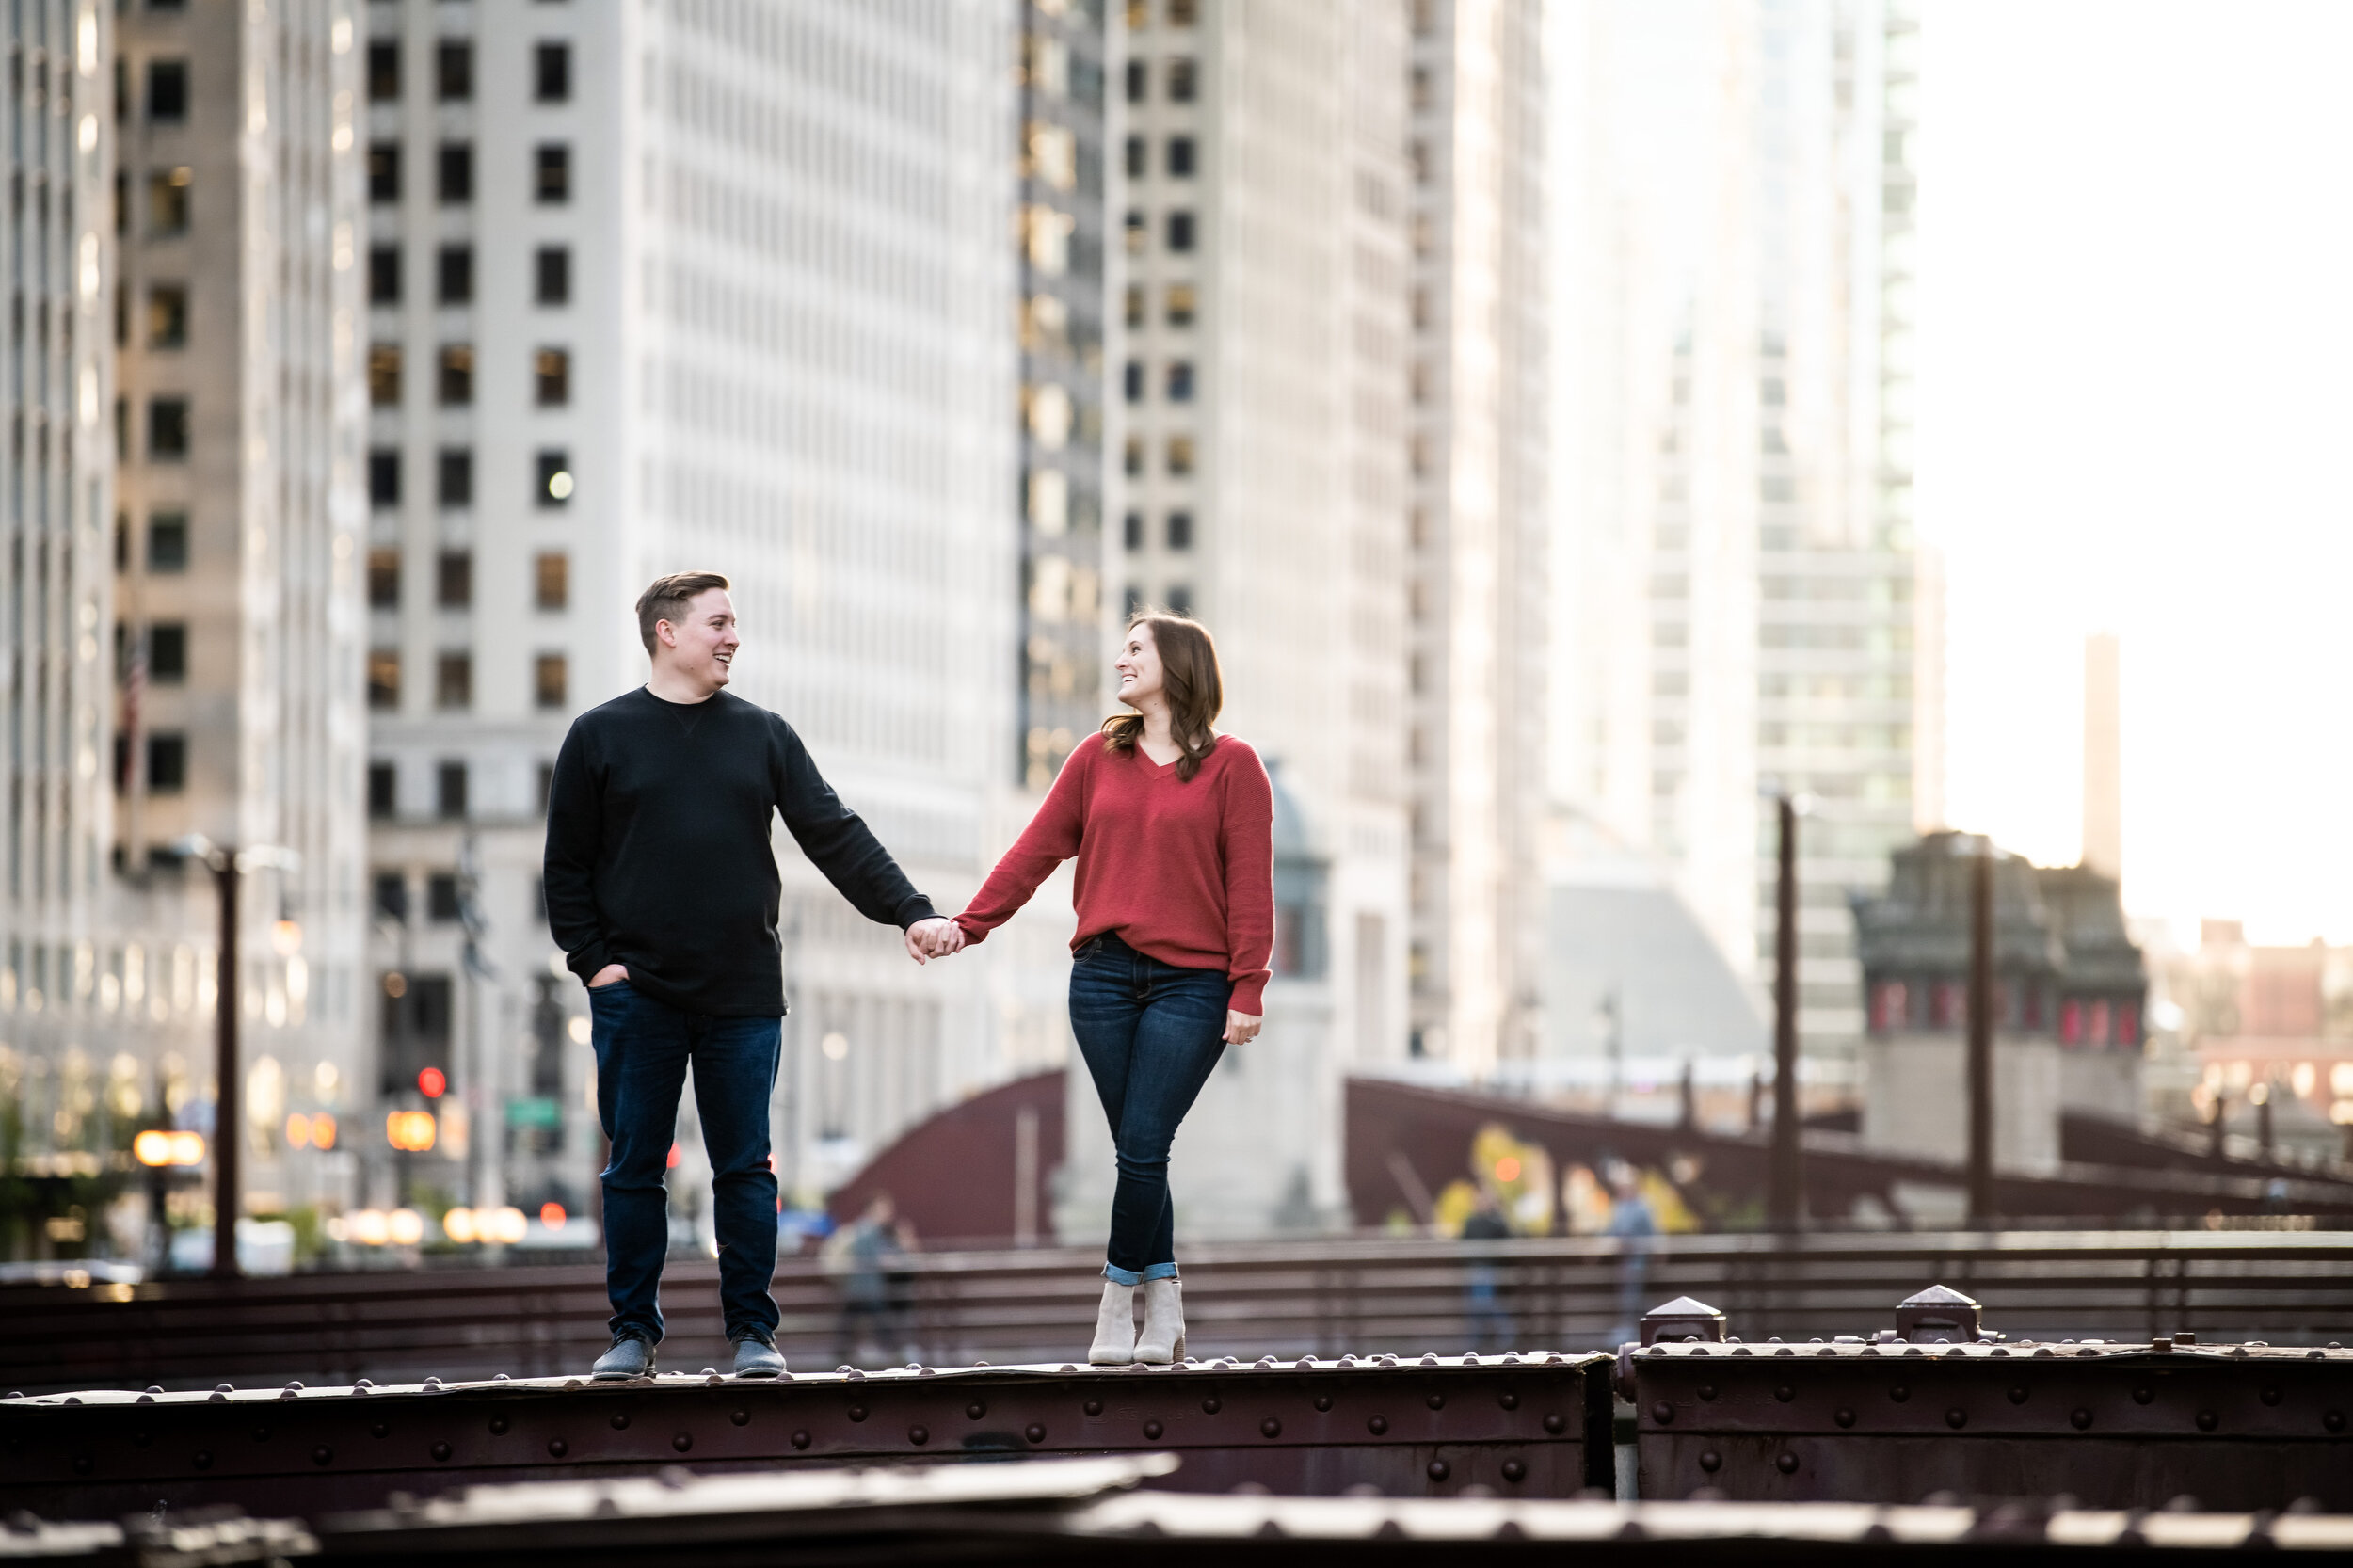 Unique engagement photo of bride and groom on the Chicago bridge.